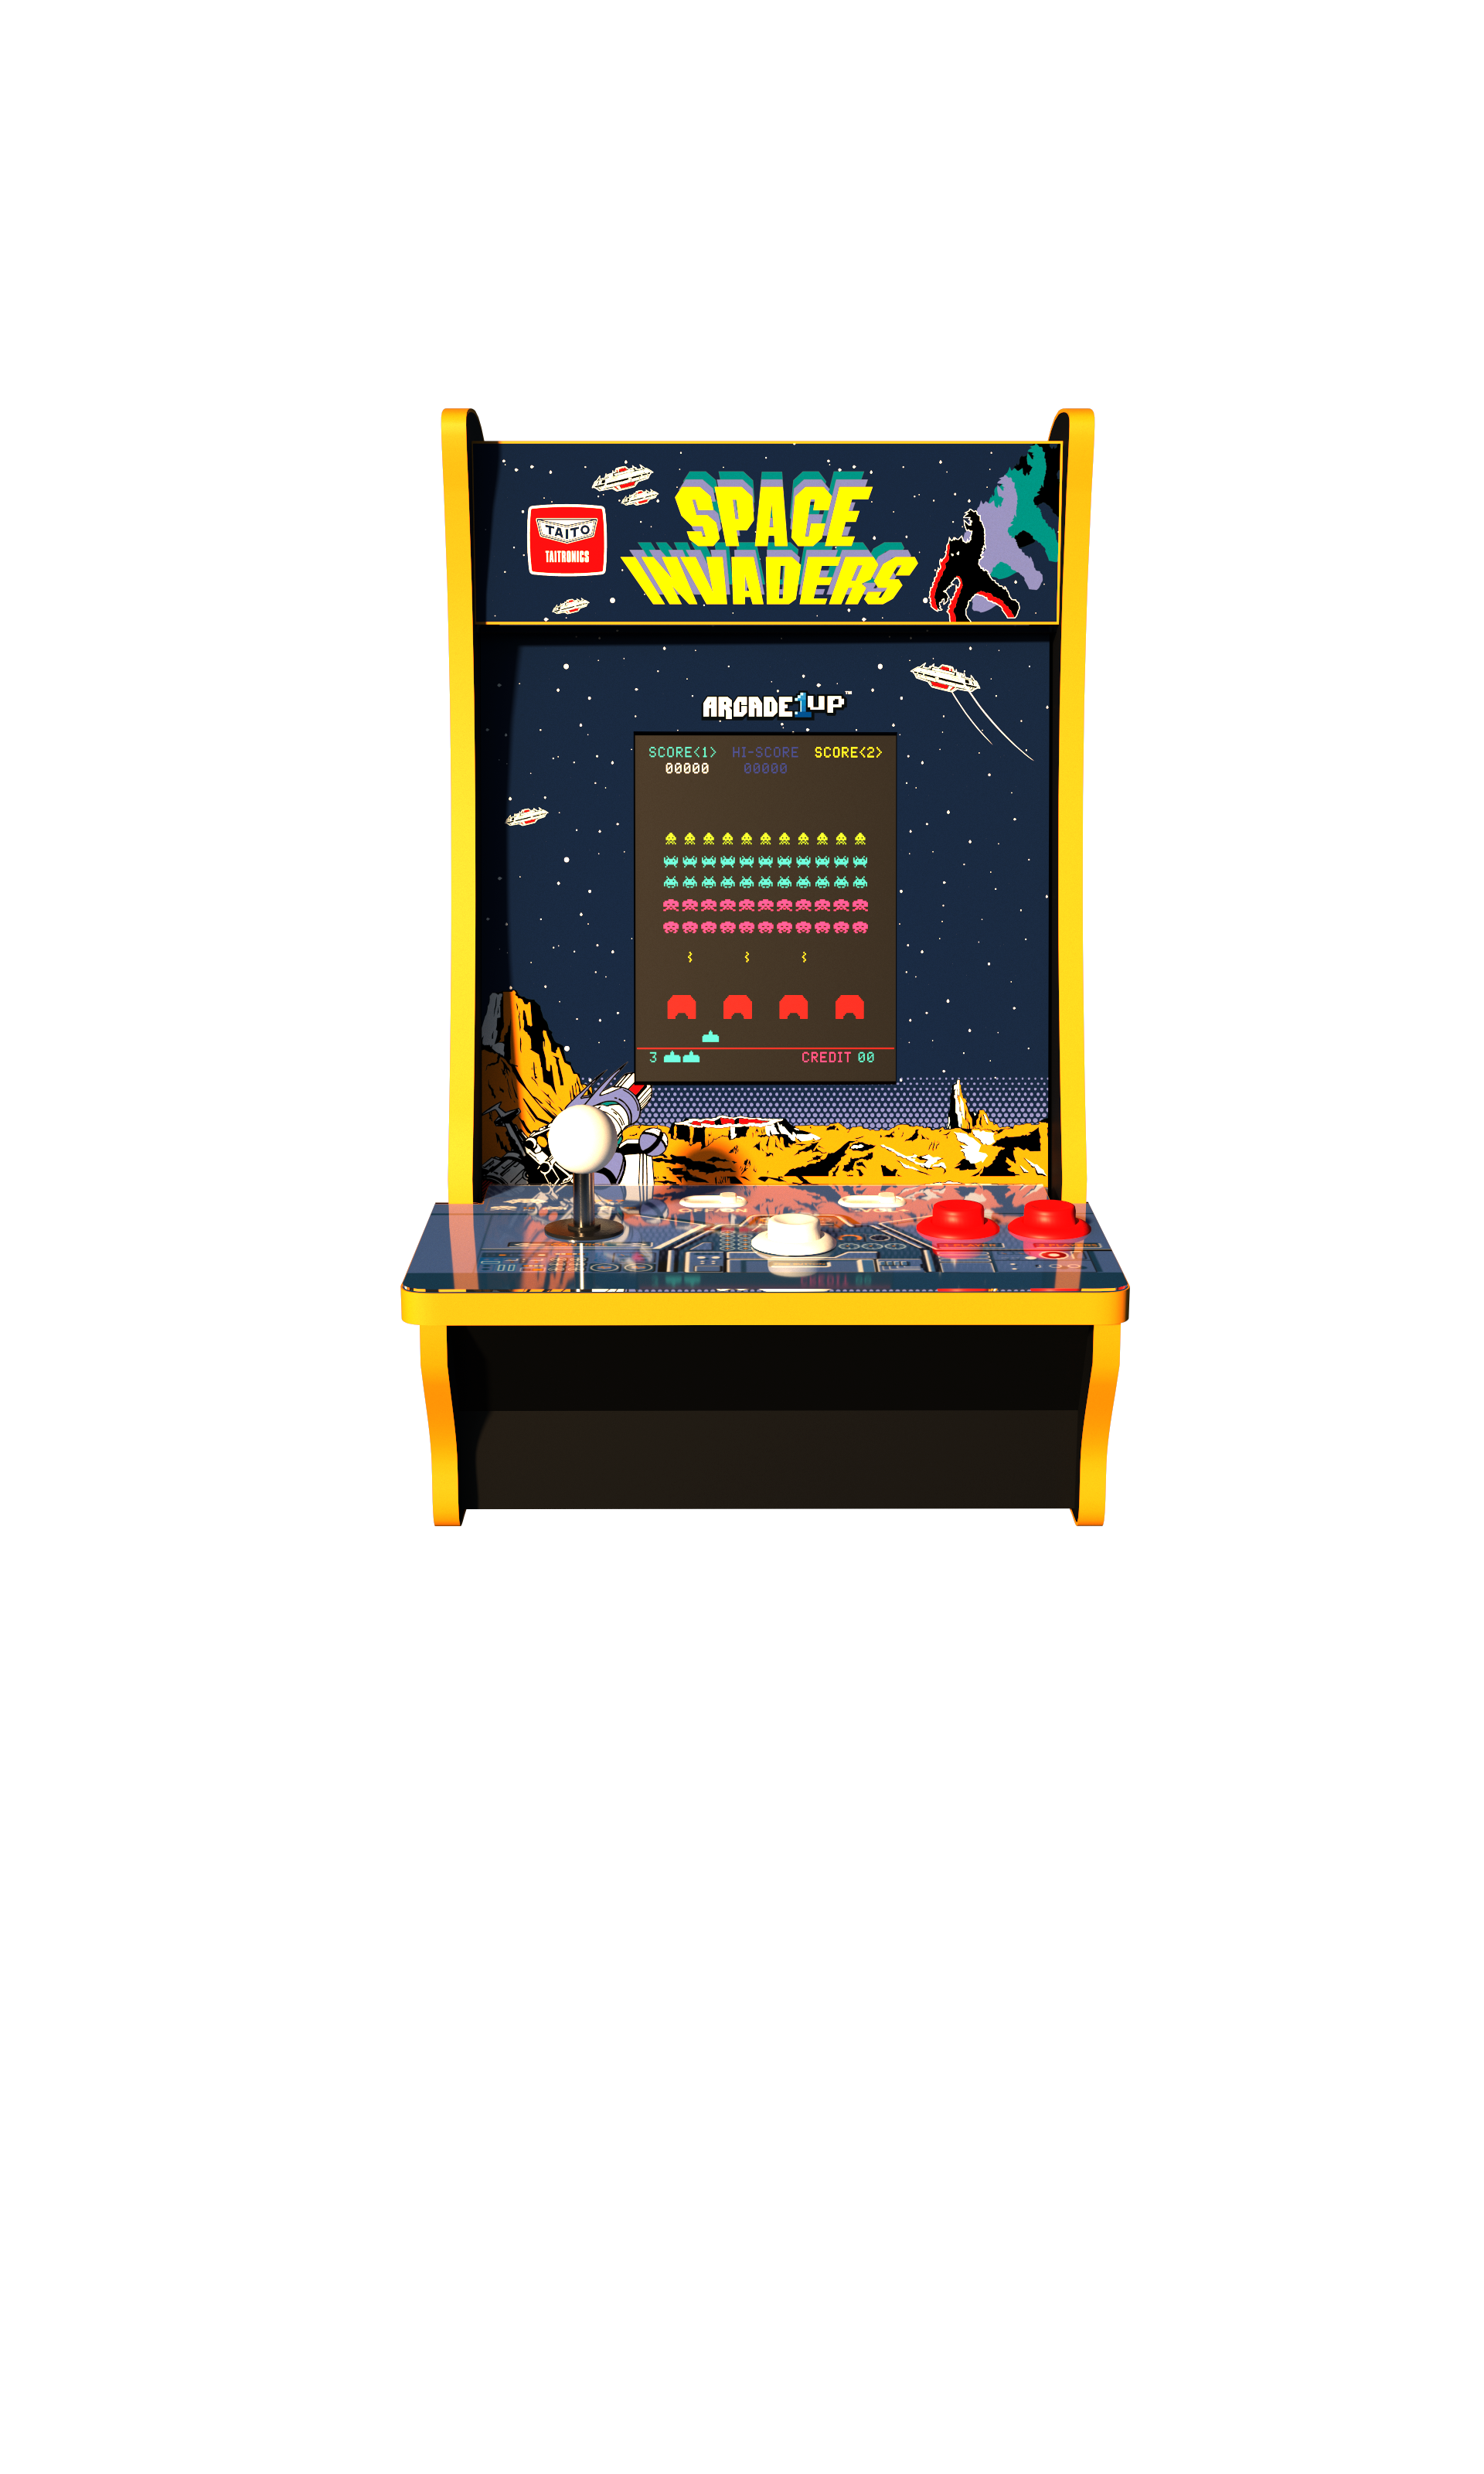 Space Invaders Counter Arcade Machine, Arcade1UP - image 4 of 8